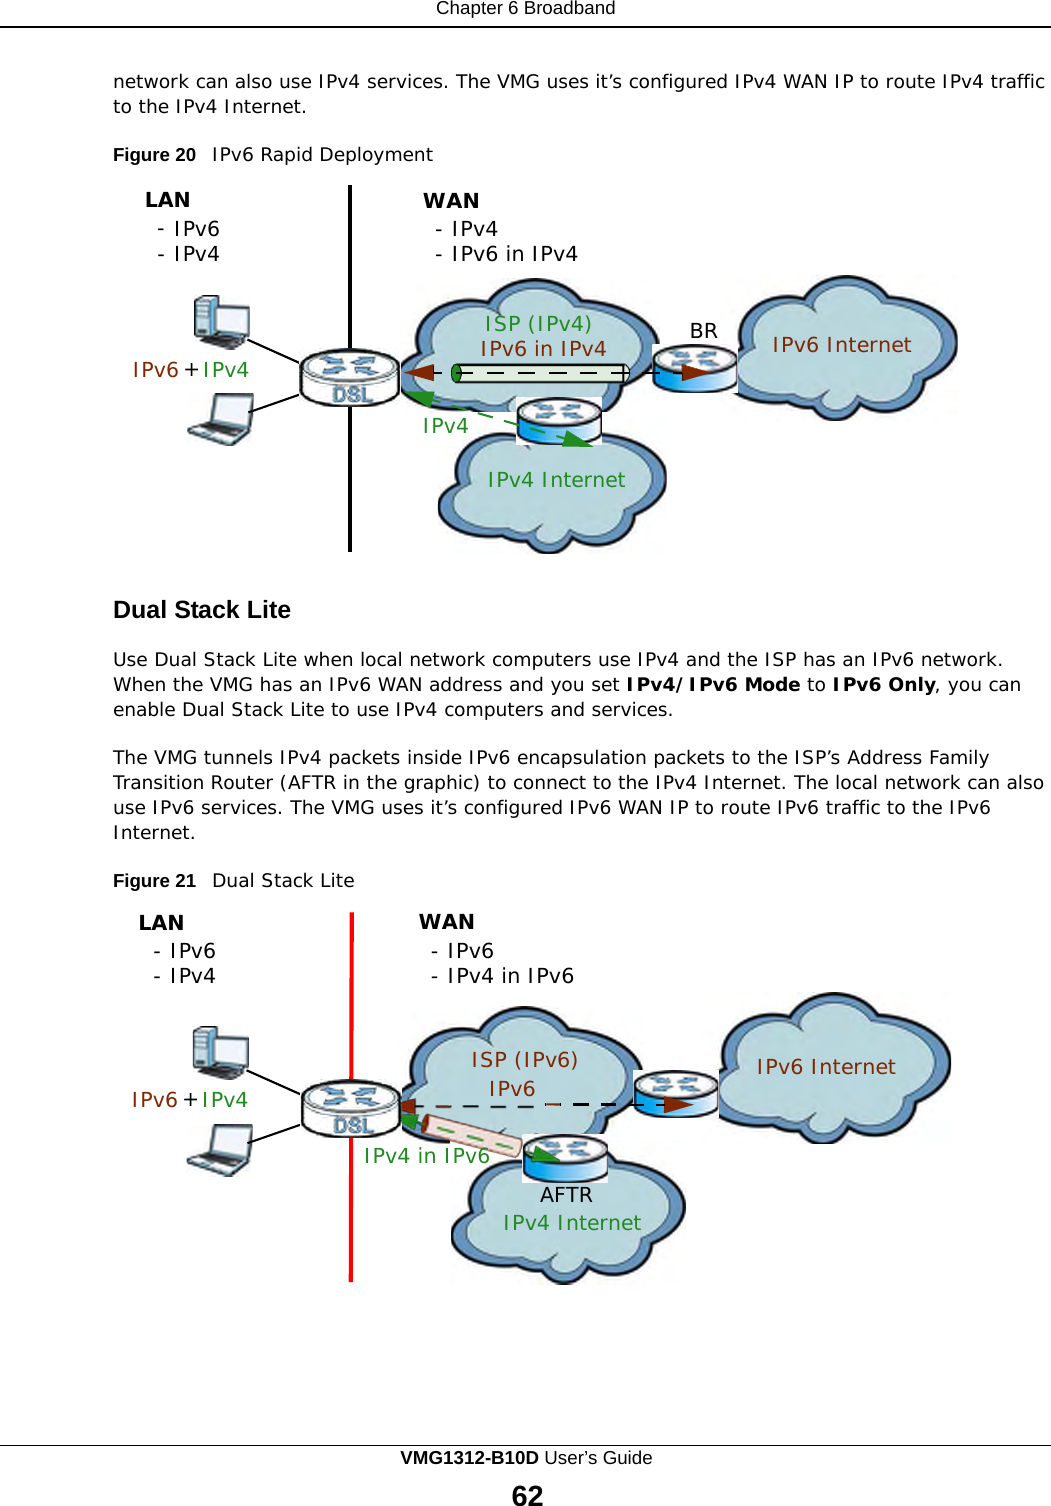 Chapter 6 Broadband                                        network can also use IPv4 services. The VMG uses it’s configured IPv4 WAN IP to route IPv4 traffic to the IPv4 Internet.  Figure 20   IPv6 Rapid Deployment  LAN - IPv6 - IPv4 WAN - IPv4 - IPv6 in IPv4     IPv6 + IPv4 ISP (IPv4) IPv6 in IPv4 BR IPv6 Internet  IPv4  IPv4 Internet      Dual Stack Lite  Use Dual Stack Lite when local network computers use IPv4 and the ISP has an IPv6 network. When the VMG has an IPv6 WAN address and you set IPv4/IPv6 Mode to IPv6 Only, you can enable Dual Stack Lite to use IPv4 computers and services.  The VMG tunnels IPv4 packets inside IPv6 encapsulation packets to the ISP’s Address Family Transition Router (AFTR in the graphic) to connect to the IPv4 Internet. The local network can also use IPv6 services. The VMG uses it’s configured IPv6 WAN IP to route IPv6 traffic to the IPv6 Internet.  Figure 21   Dual Stack Lite  LAN - IPv6 - IPv4 WAN - IPv6 - IPv4 in IPv6      IPv6 + IPv4 ISP (IPv6) IPv6 Internet IPv6  IPv4 in IPv6   AFTR IPv4 Internet VMG1312-B10D User’s Guide 62  